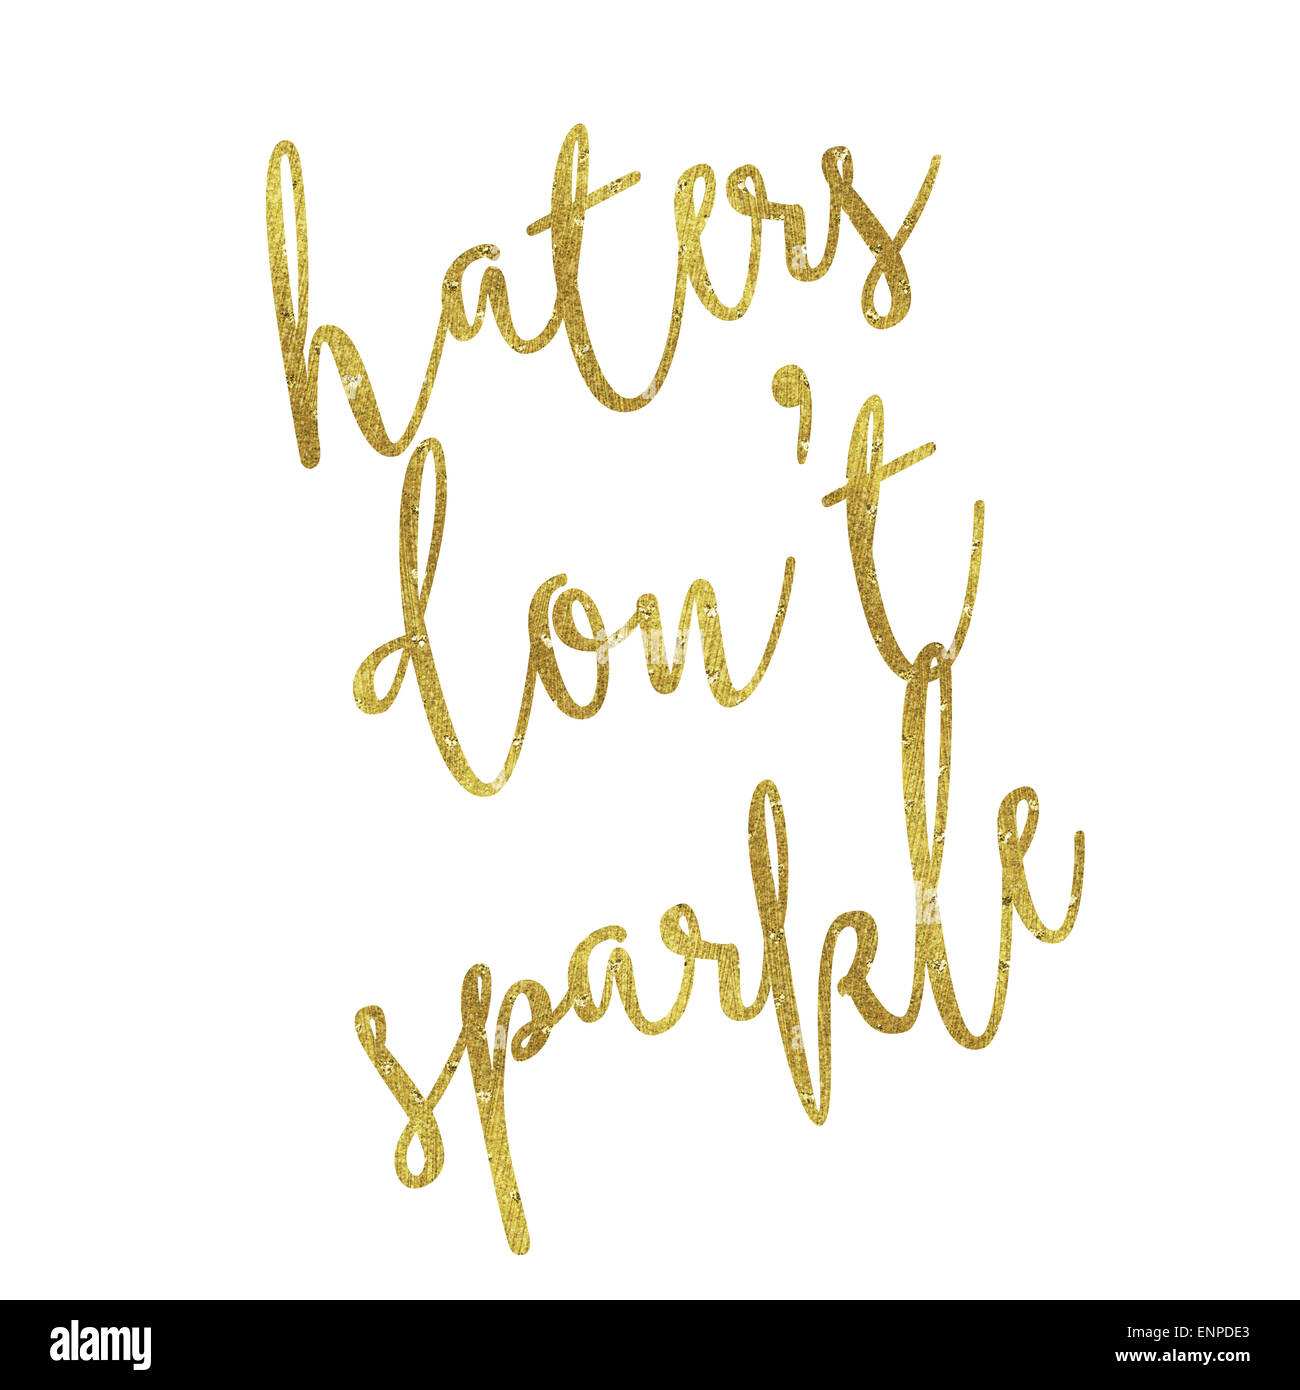 Haters Don't Sparkle Gold Faux Foil Metallic Glitter Inspirational Quote Isolated on White Background Stock Photo